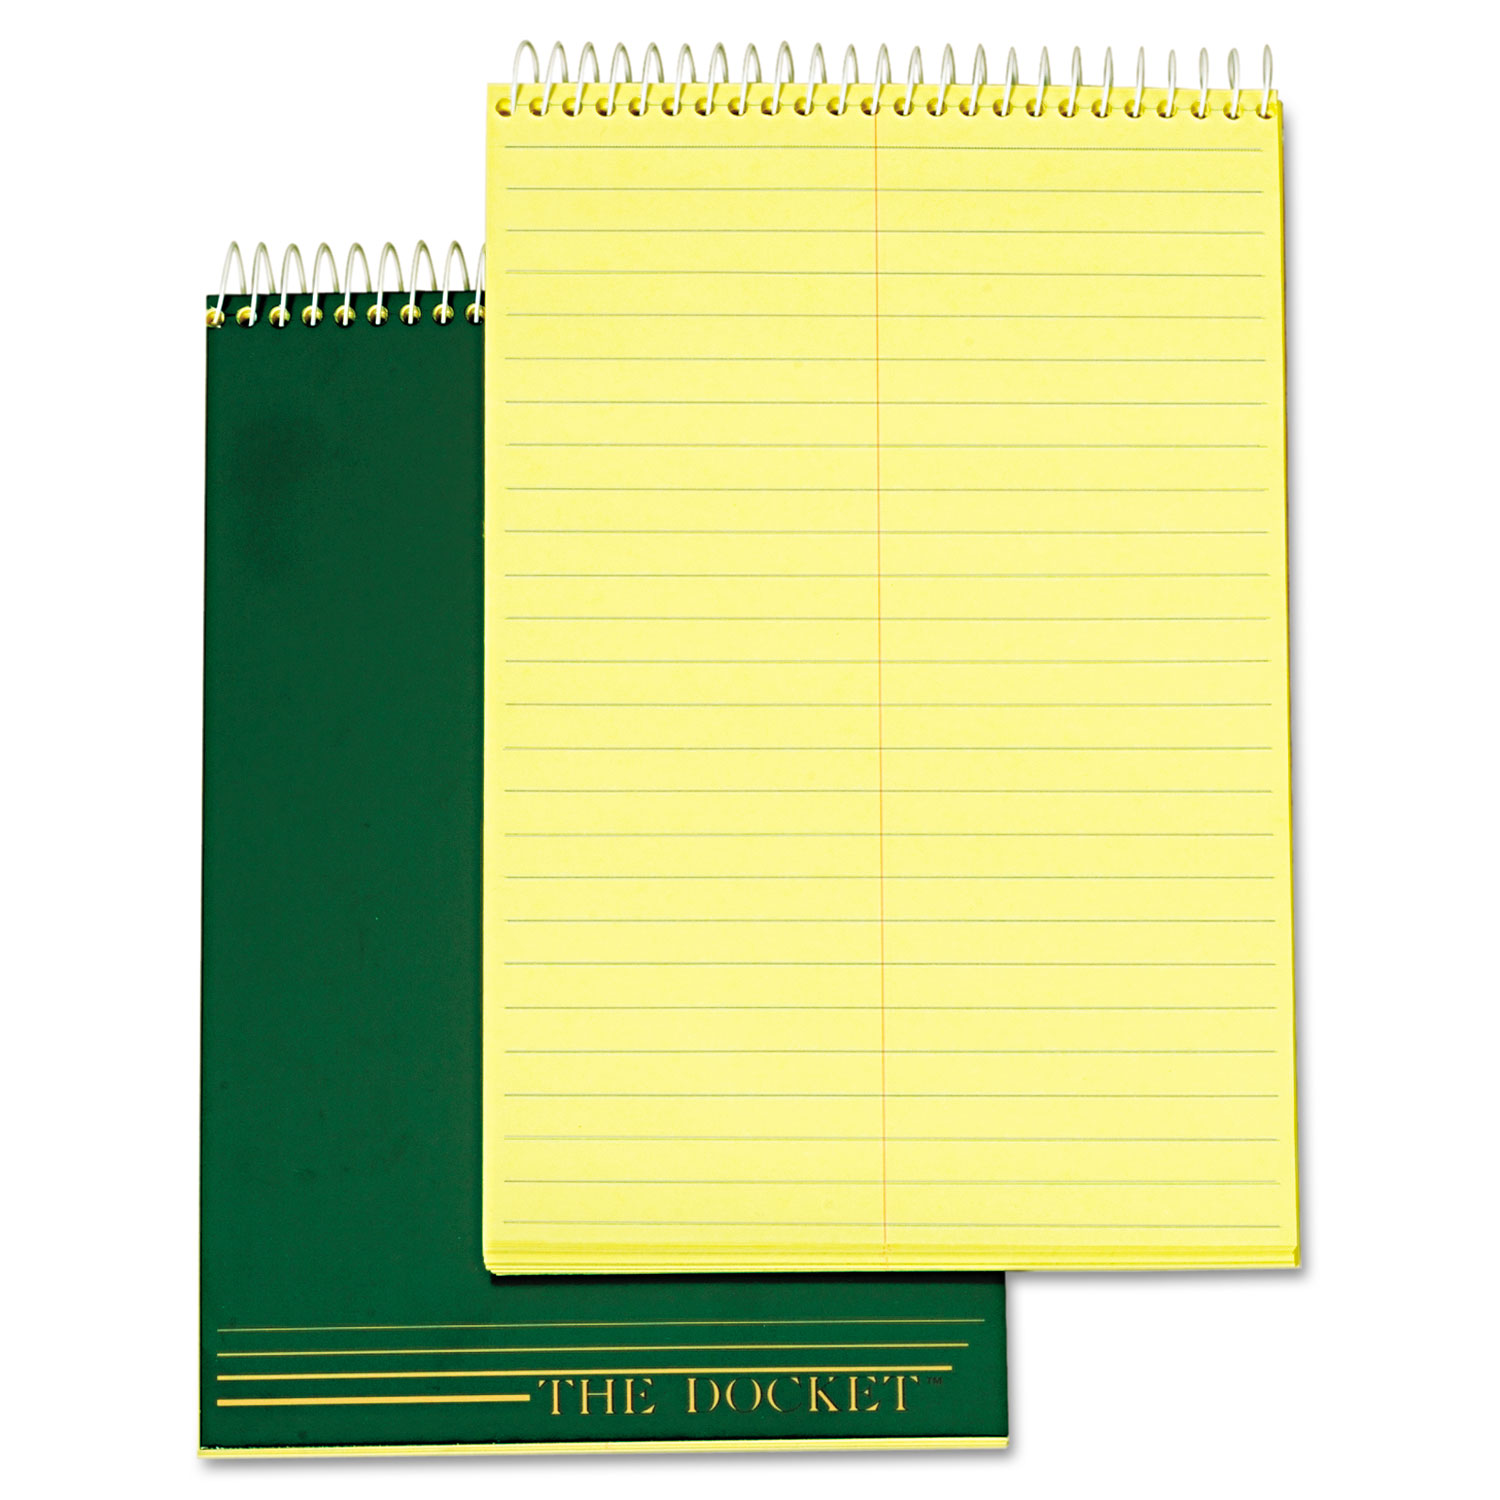 TOPS™ Docket Steno Book, Gregg Rule, 6 x 9, Canary, 100 Sheets